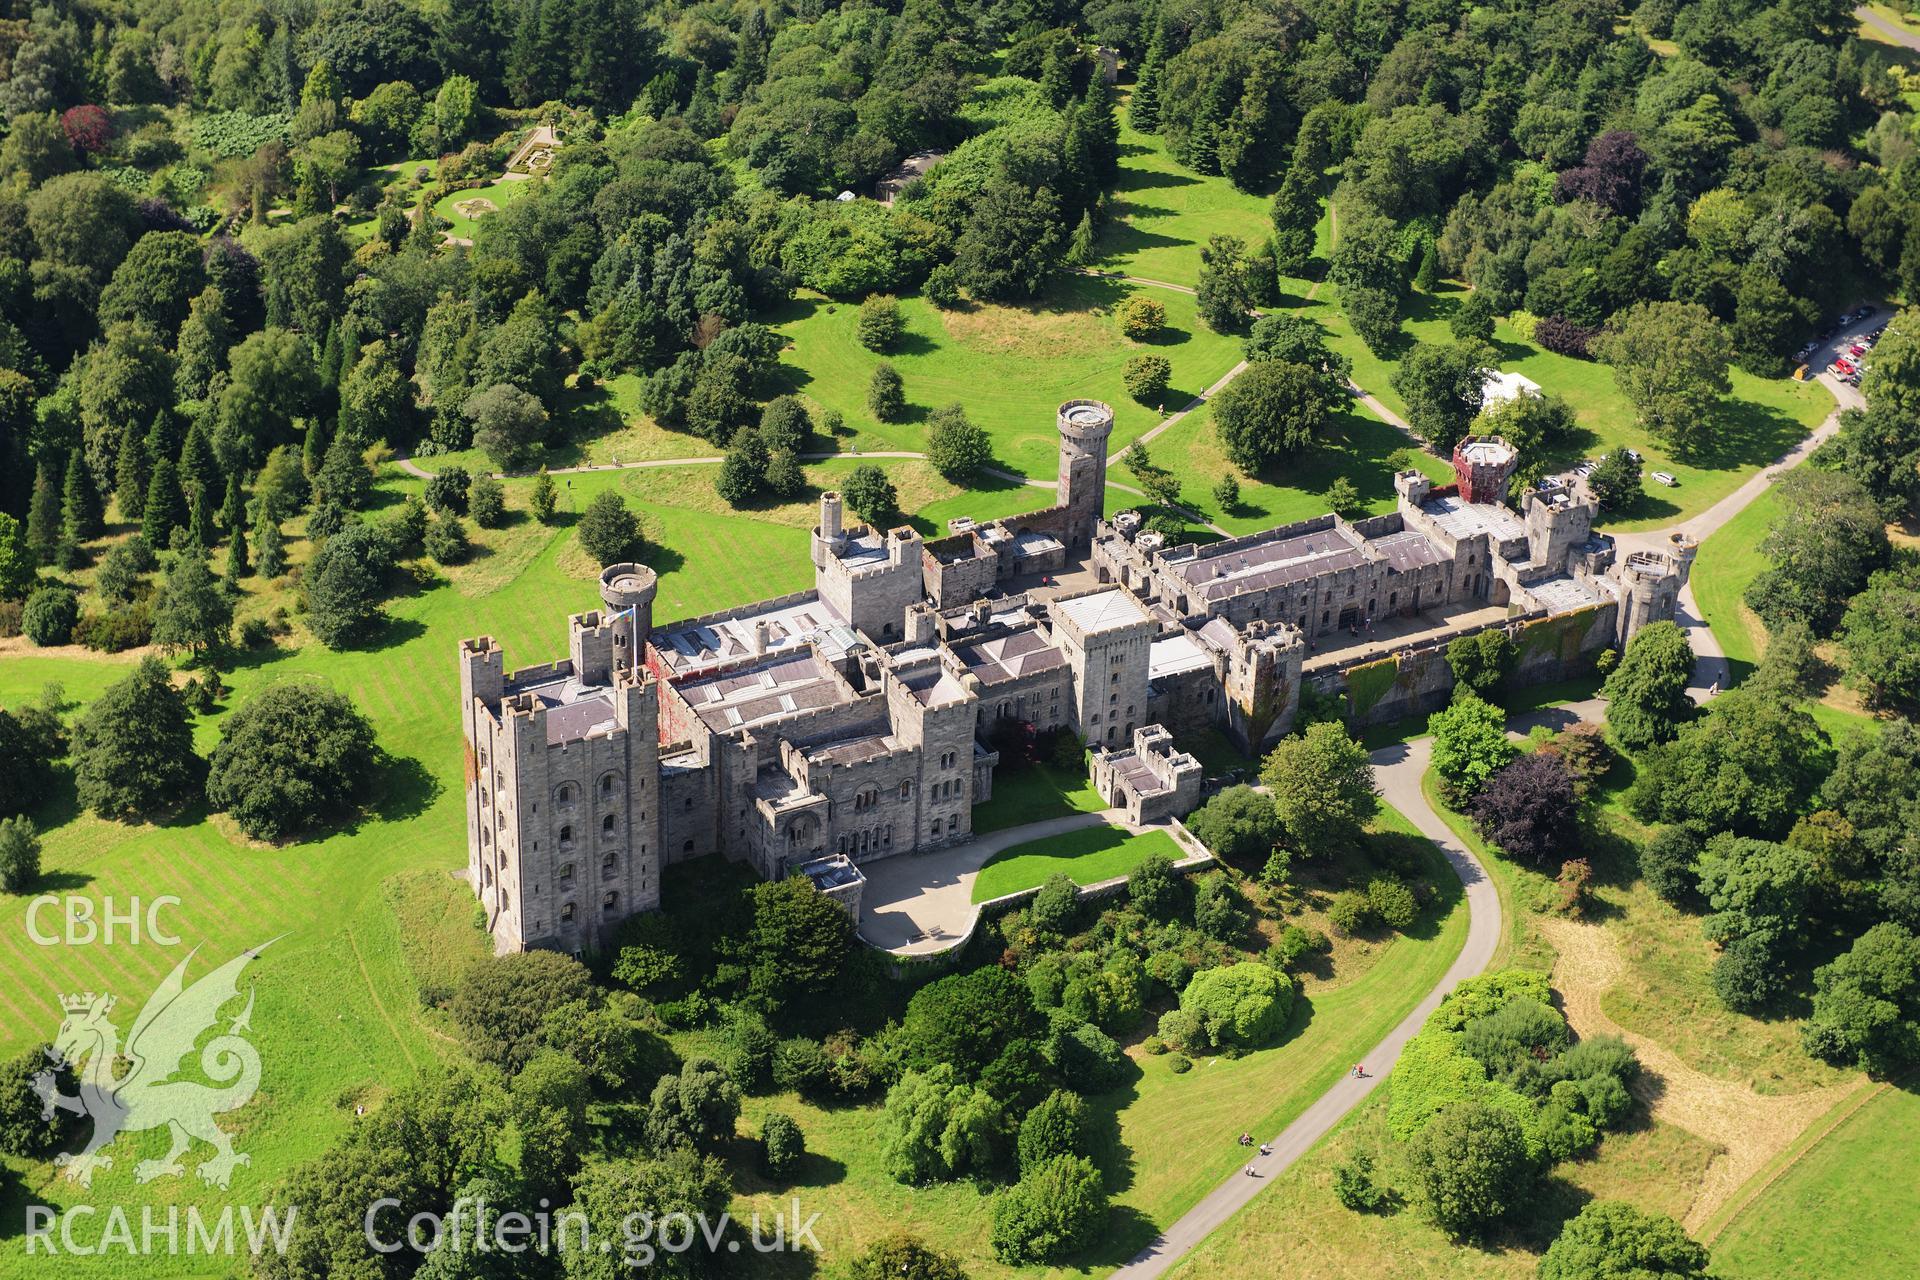 RCAHMW colour oblique photograph of Penrhyn Castle, viewed from the south-east. Taken by Toby Driver on 10/08/2012.